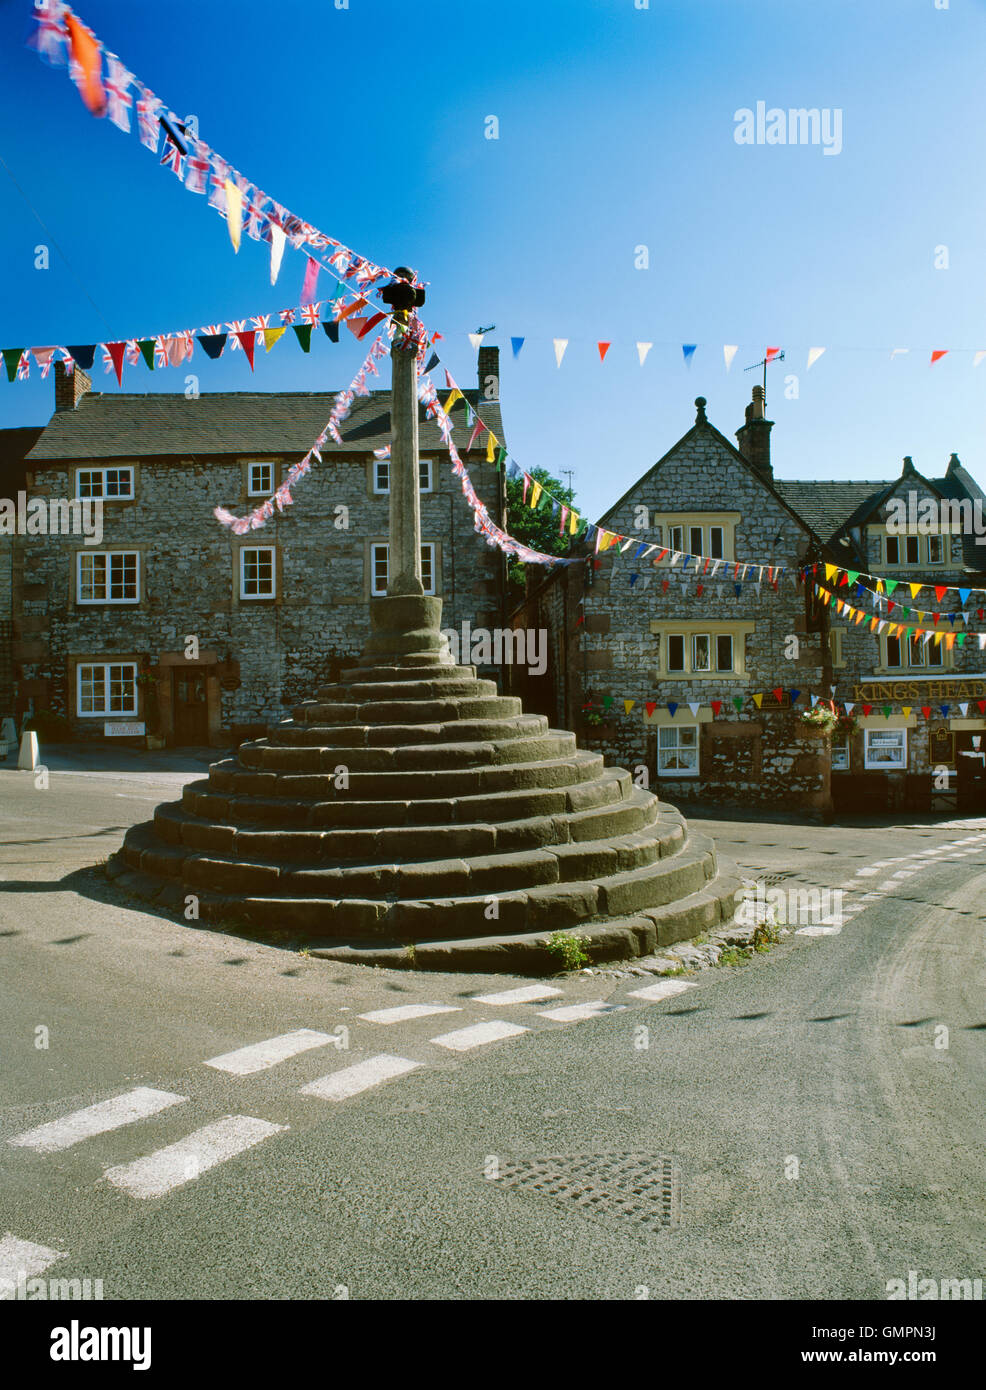 Bonsall, Derbyshire: Medieval Market Cross, and King's Head pub, decorated with bunting for the village well dressings in August. Stock Photo